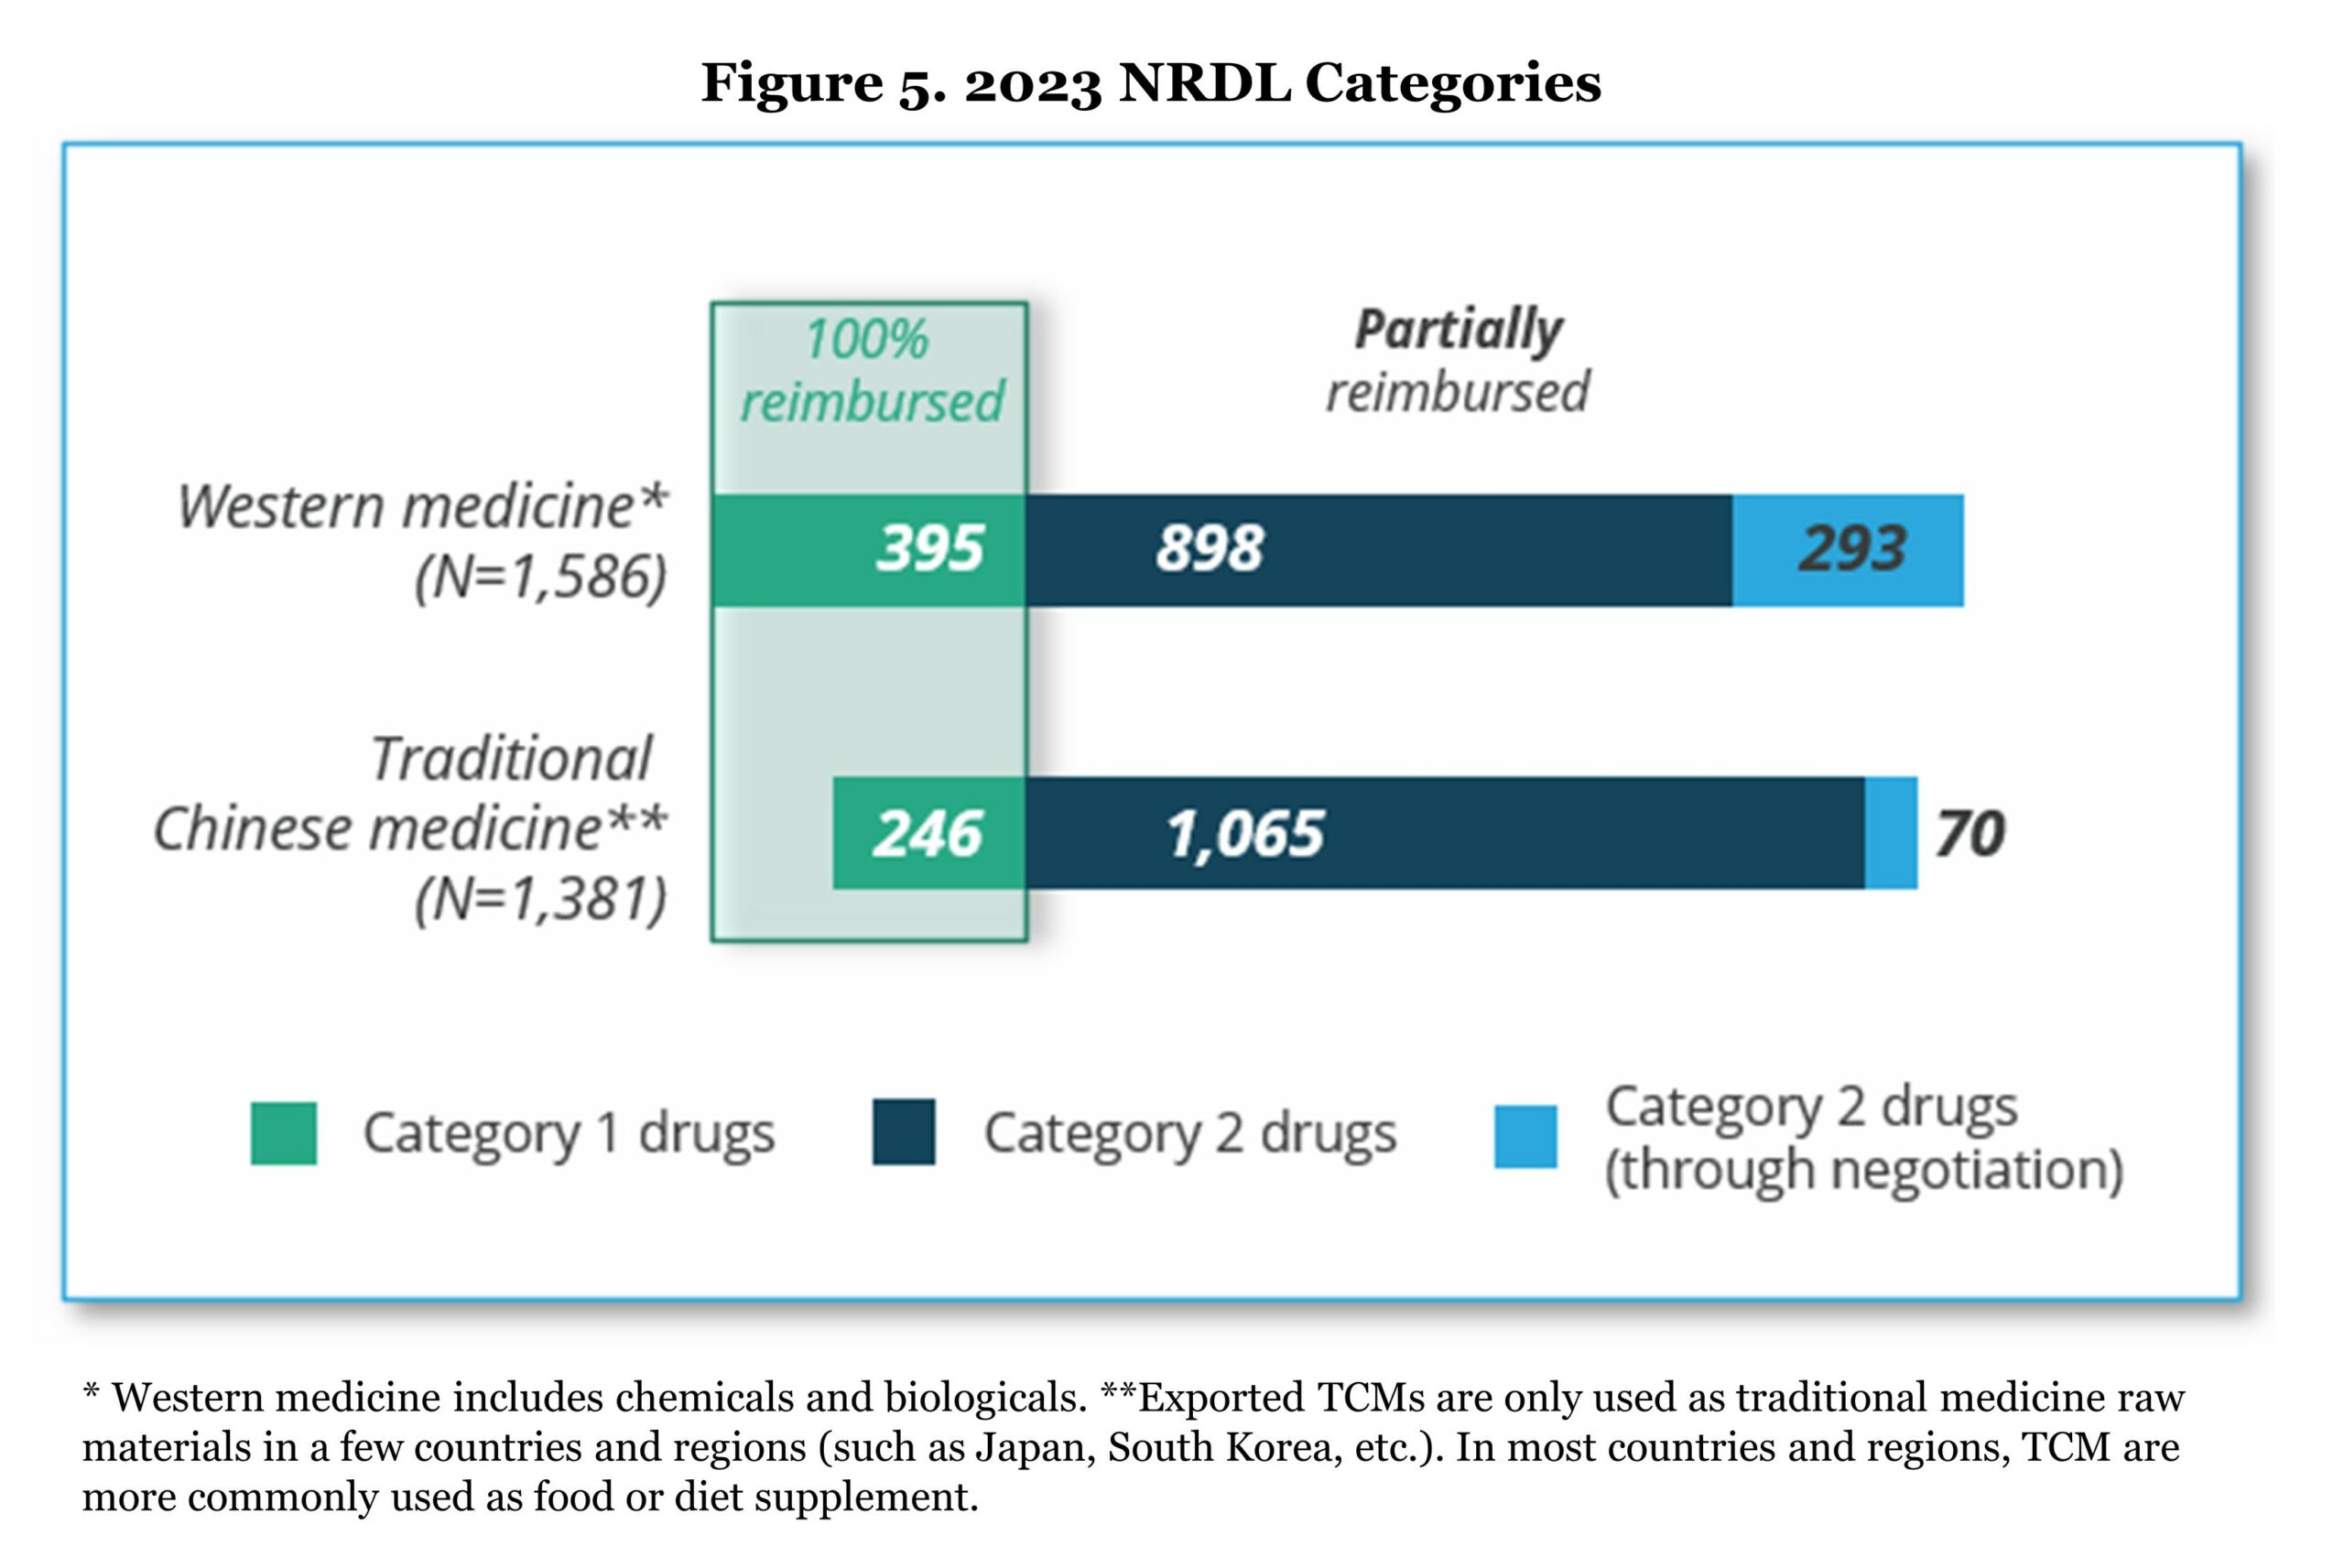 Figure 5. 2023 NRDL Categories shows the difference in coverage between western medicine and traditional Chinese medicine. For category 1 drugs that are 100% reimbursed there are 395 western medicines and 246 traditional Chinese medicine. For category 2 drugs that are partially reimbursed there are 898 western medicines and 1,065 traditional Chinese medicine. And for category 2 drugs (through negotiation) that are partially reimbursed there are 293 western medicines and 70 traditional Chinese medicine. 